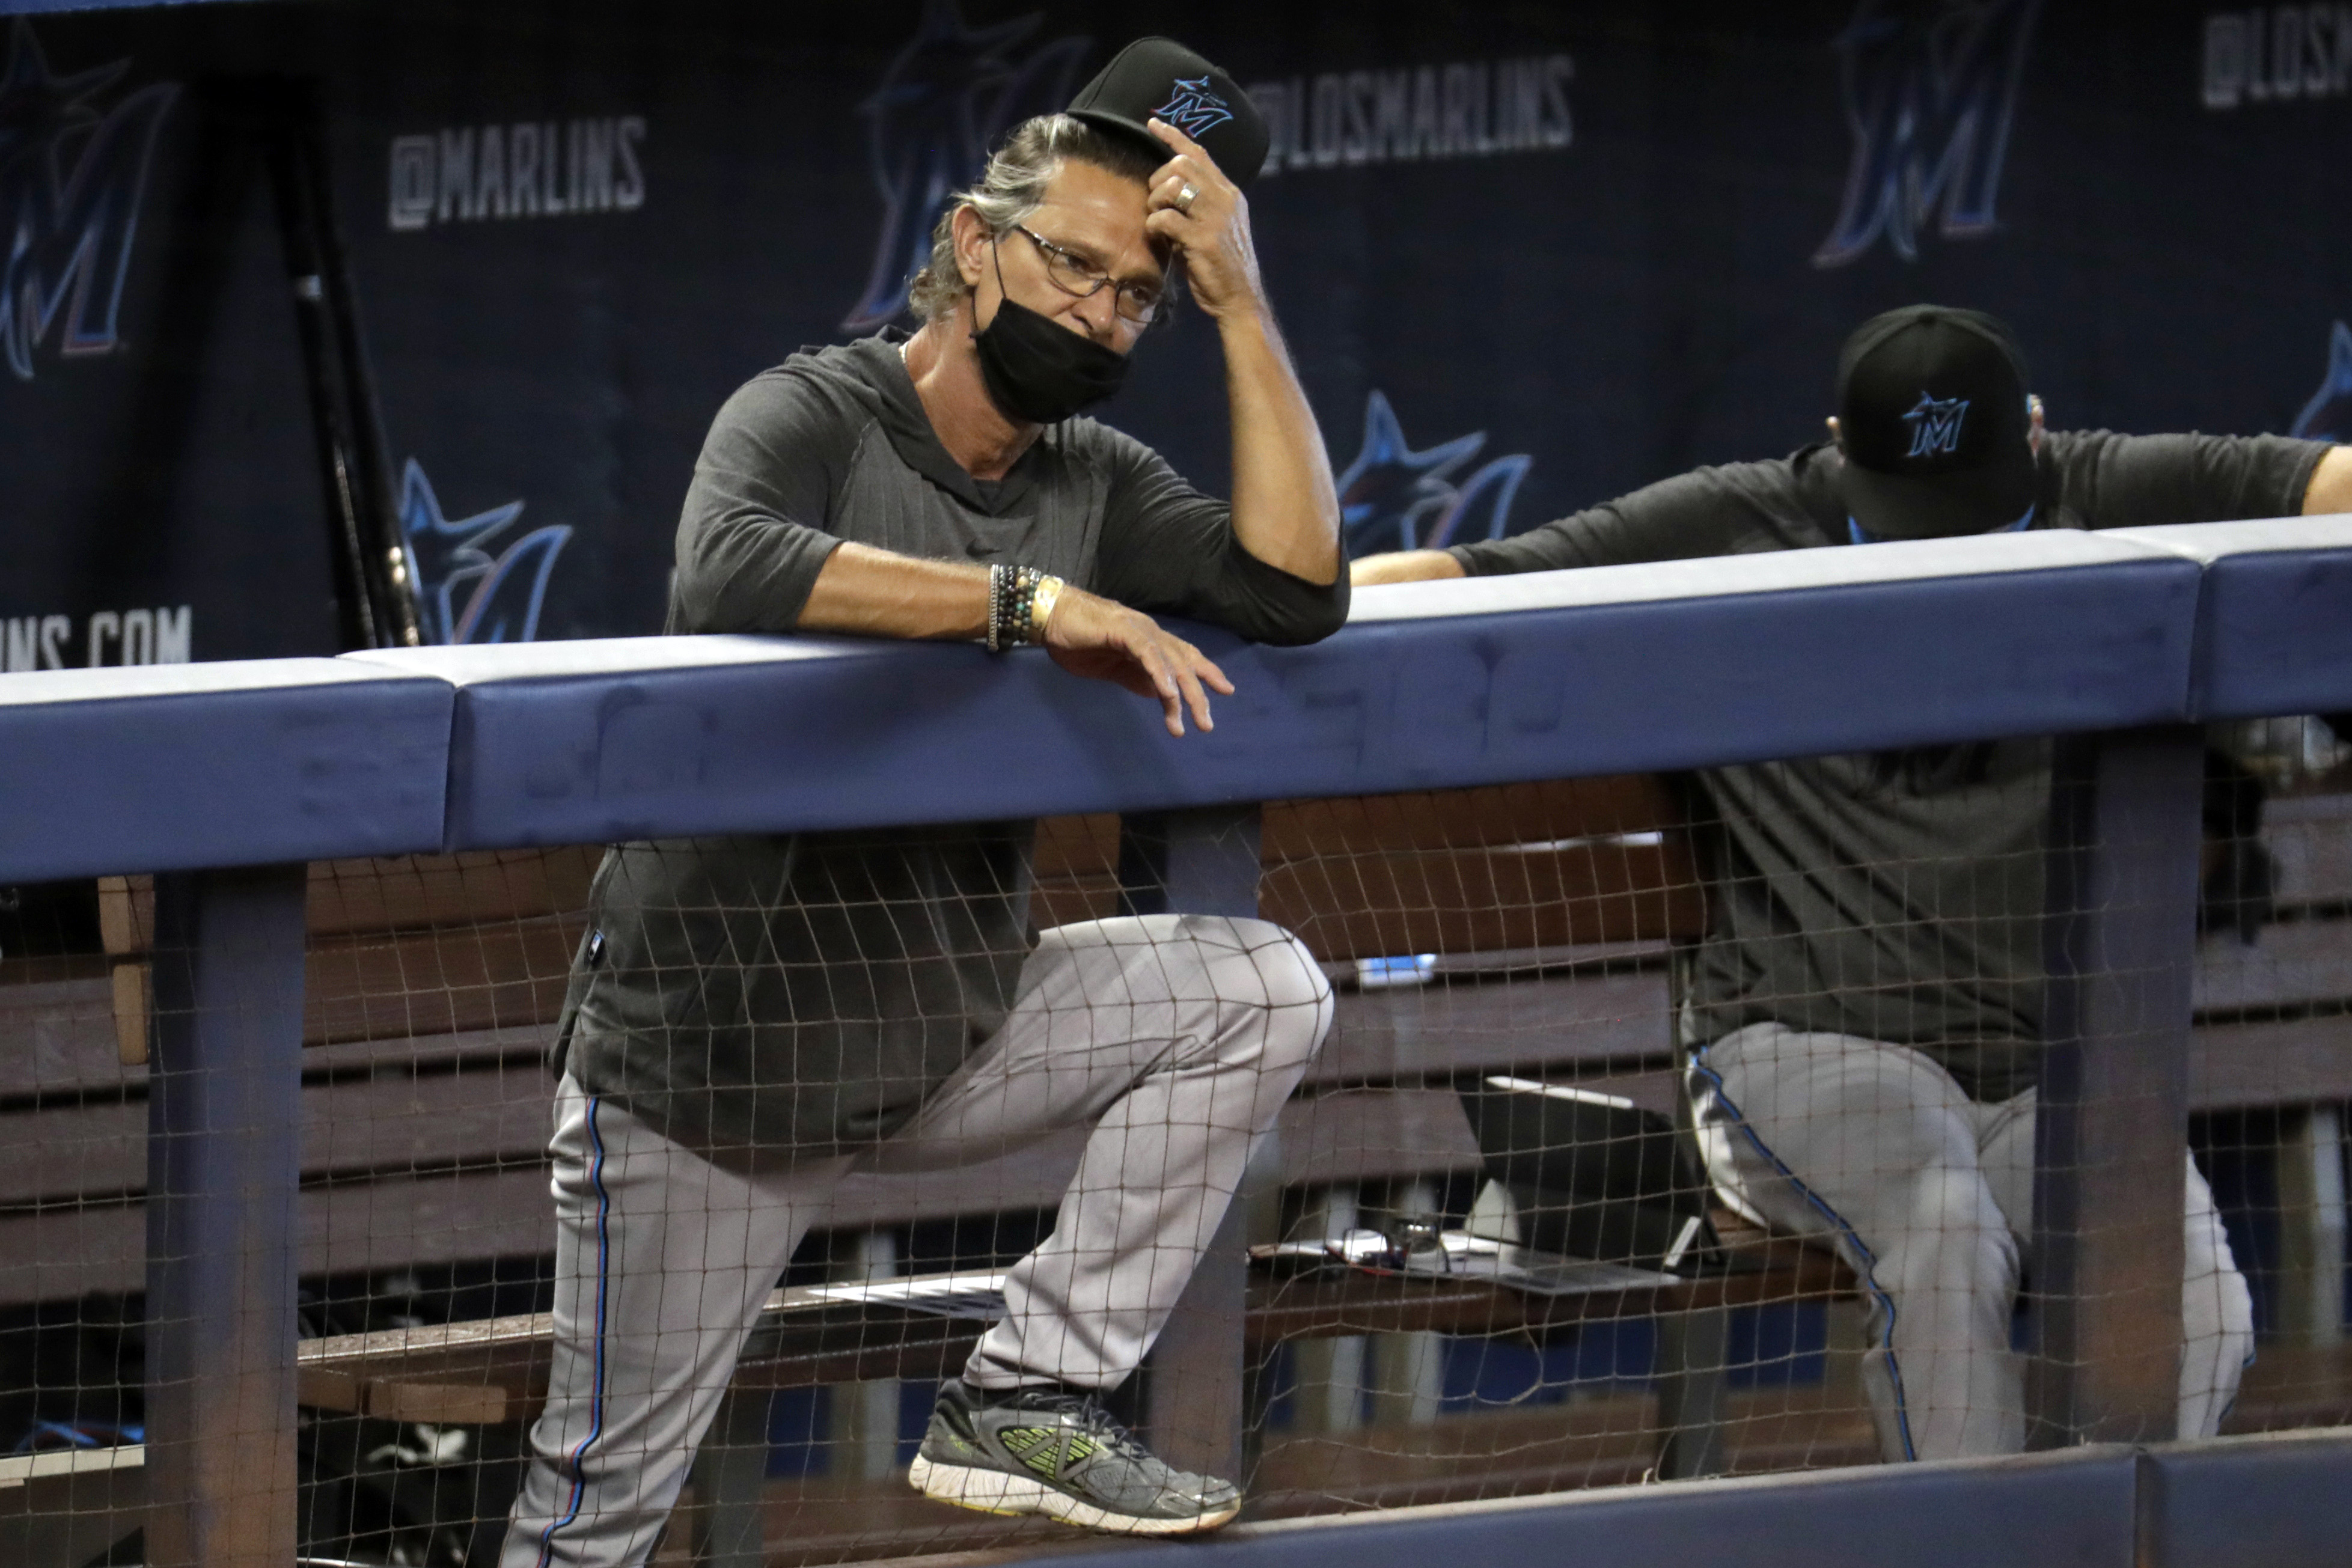 Miami Marlins: Don Mattingly's biggest challenge in South Florida